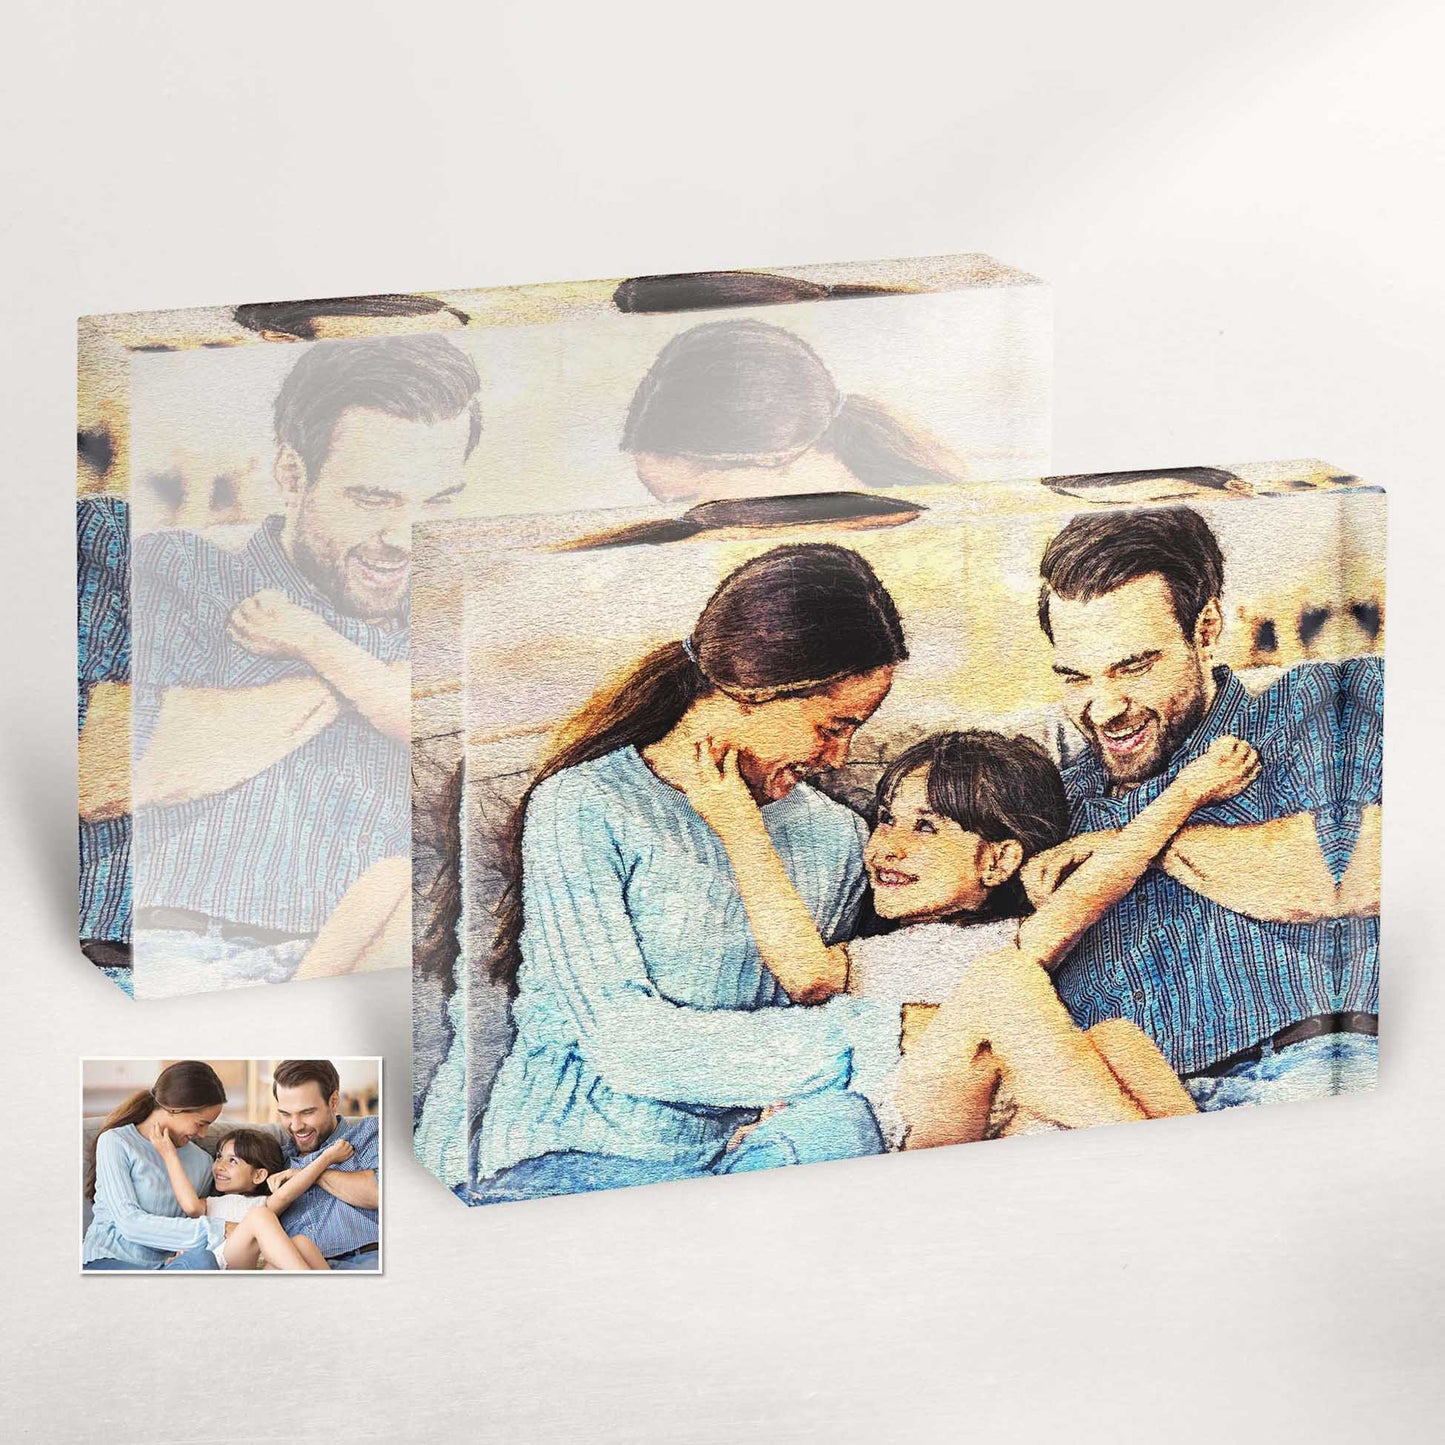 Immortalize your cherished memories with our Personalised Aquarelle Acrylic Block Photo. We turn your photo into a unique watercolor-style artwork that evokes emotions and tells a story